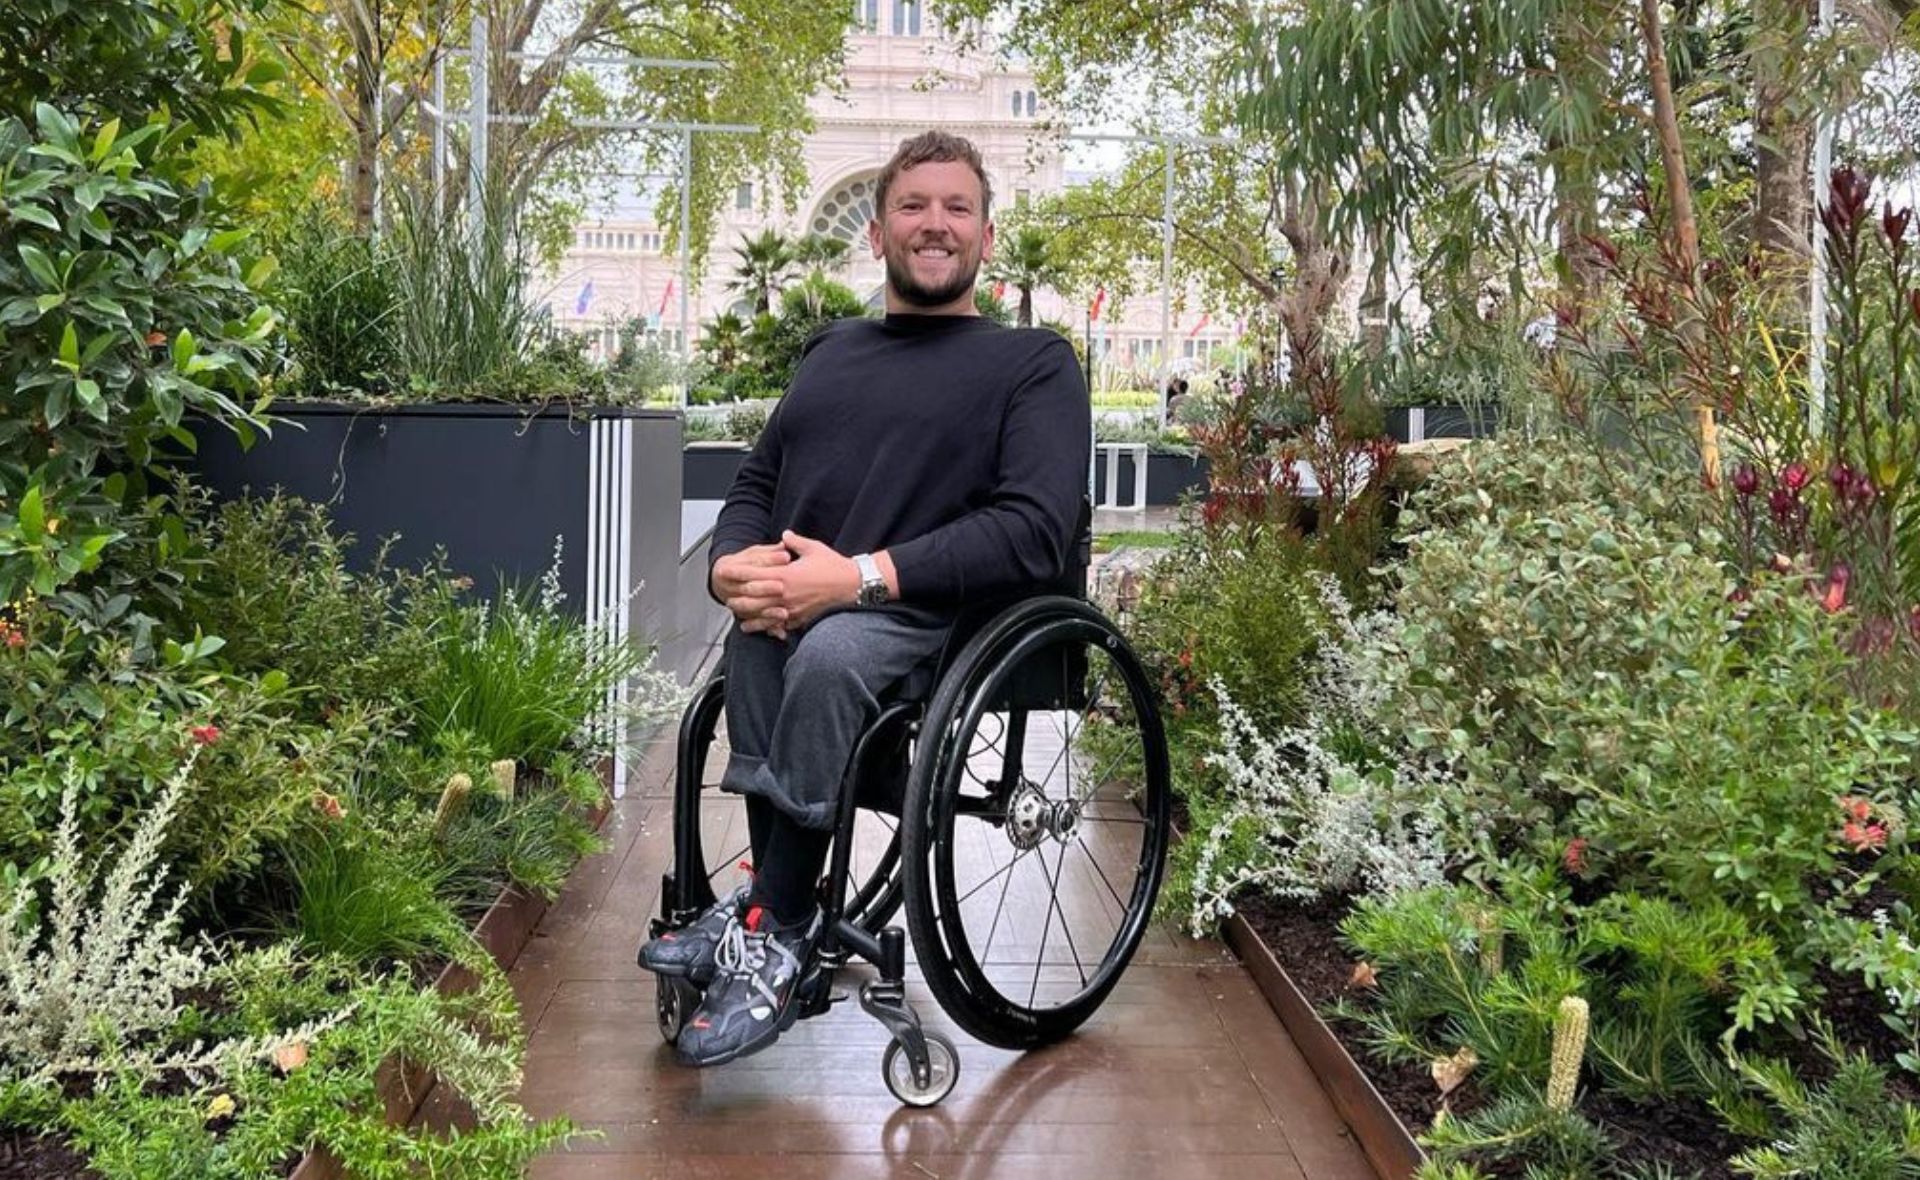 EXCLUSIVE: Don’t fear disabilities! Dylan Alcott is breaking down expectations for the disabled community